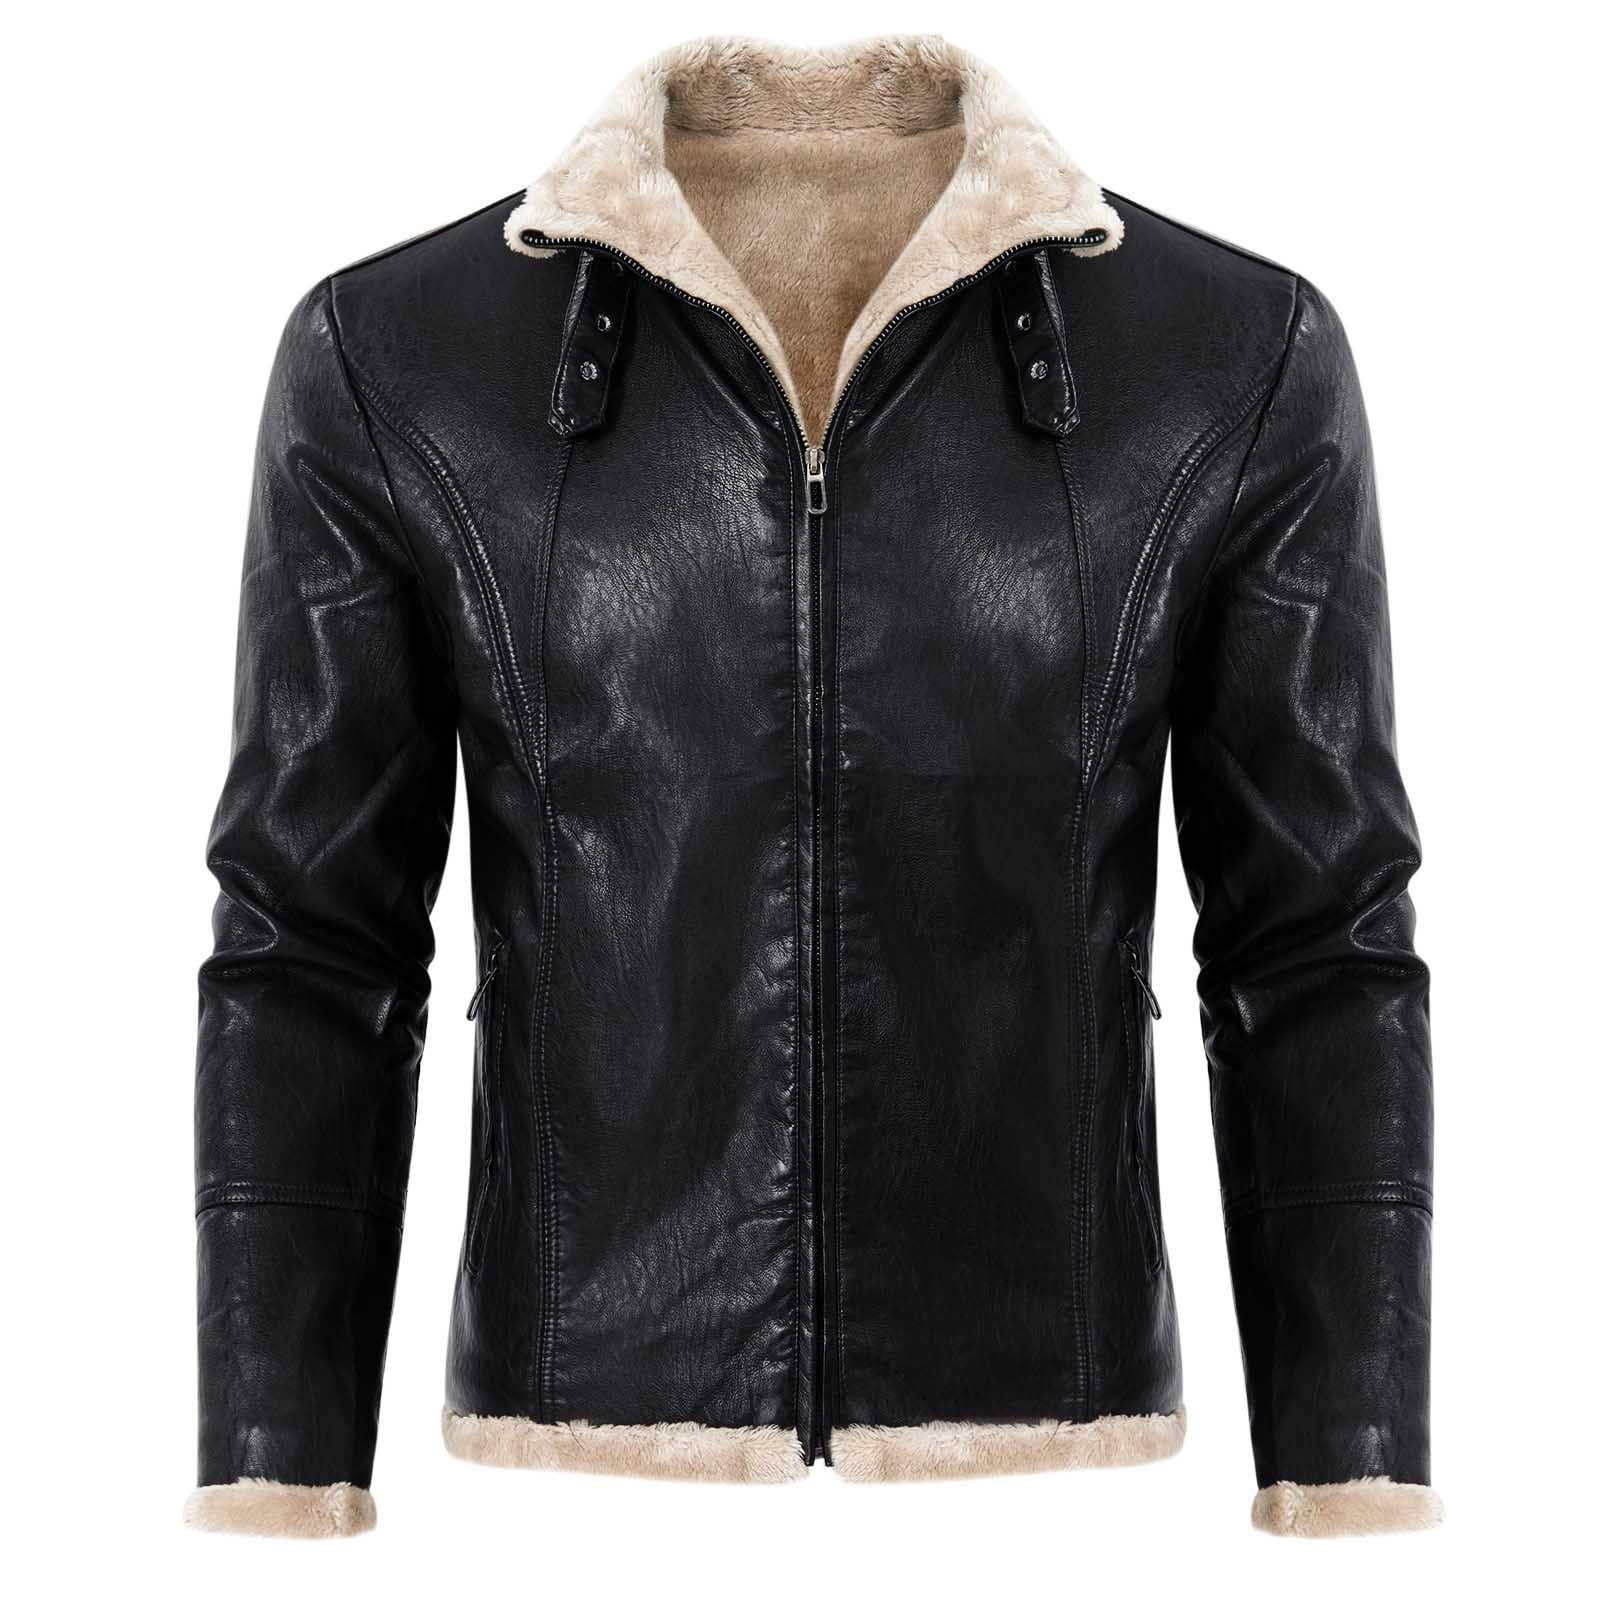 BRGZLK Leather Jacket Mens Fleece Lined Jacket Deals of The Day Collar ...